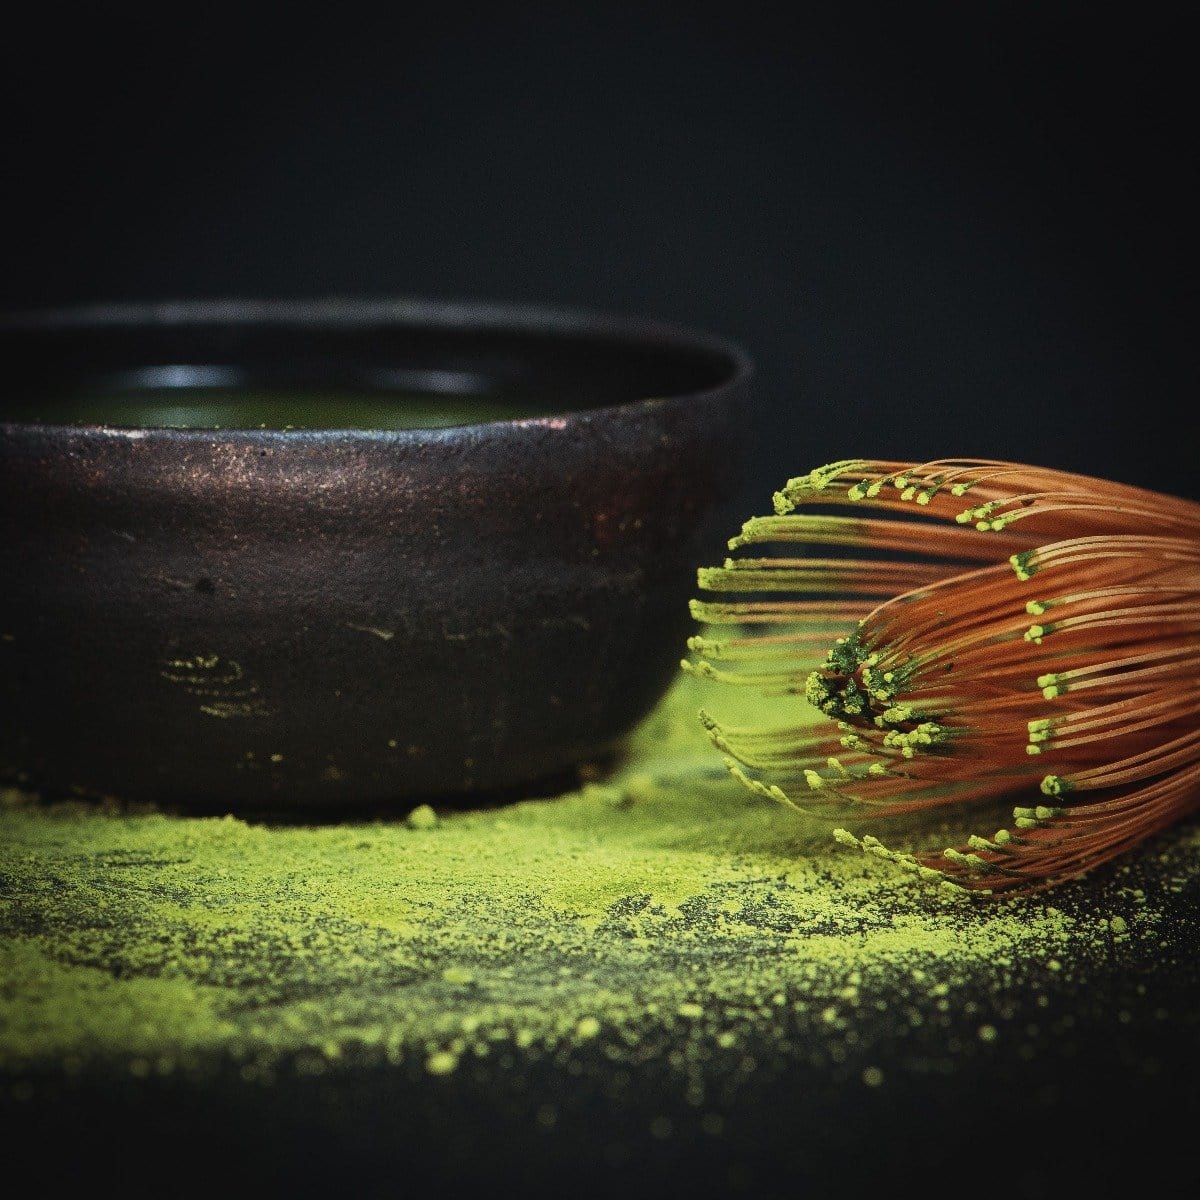 A traditional bamboo whisk sits beside a dark ceramic bowl filled with matcha tea. The Artisanal Magic Hour Matcha Whisk by Magic Hour is nestled within, while matcha powder is sprinkled around them on a dark surface, highlighting the vibrant green hue of this organic tea.